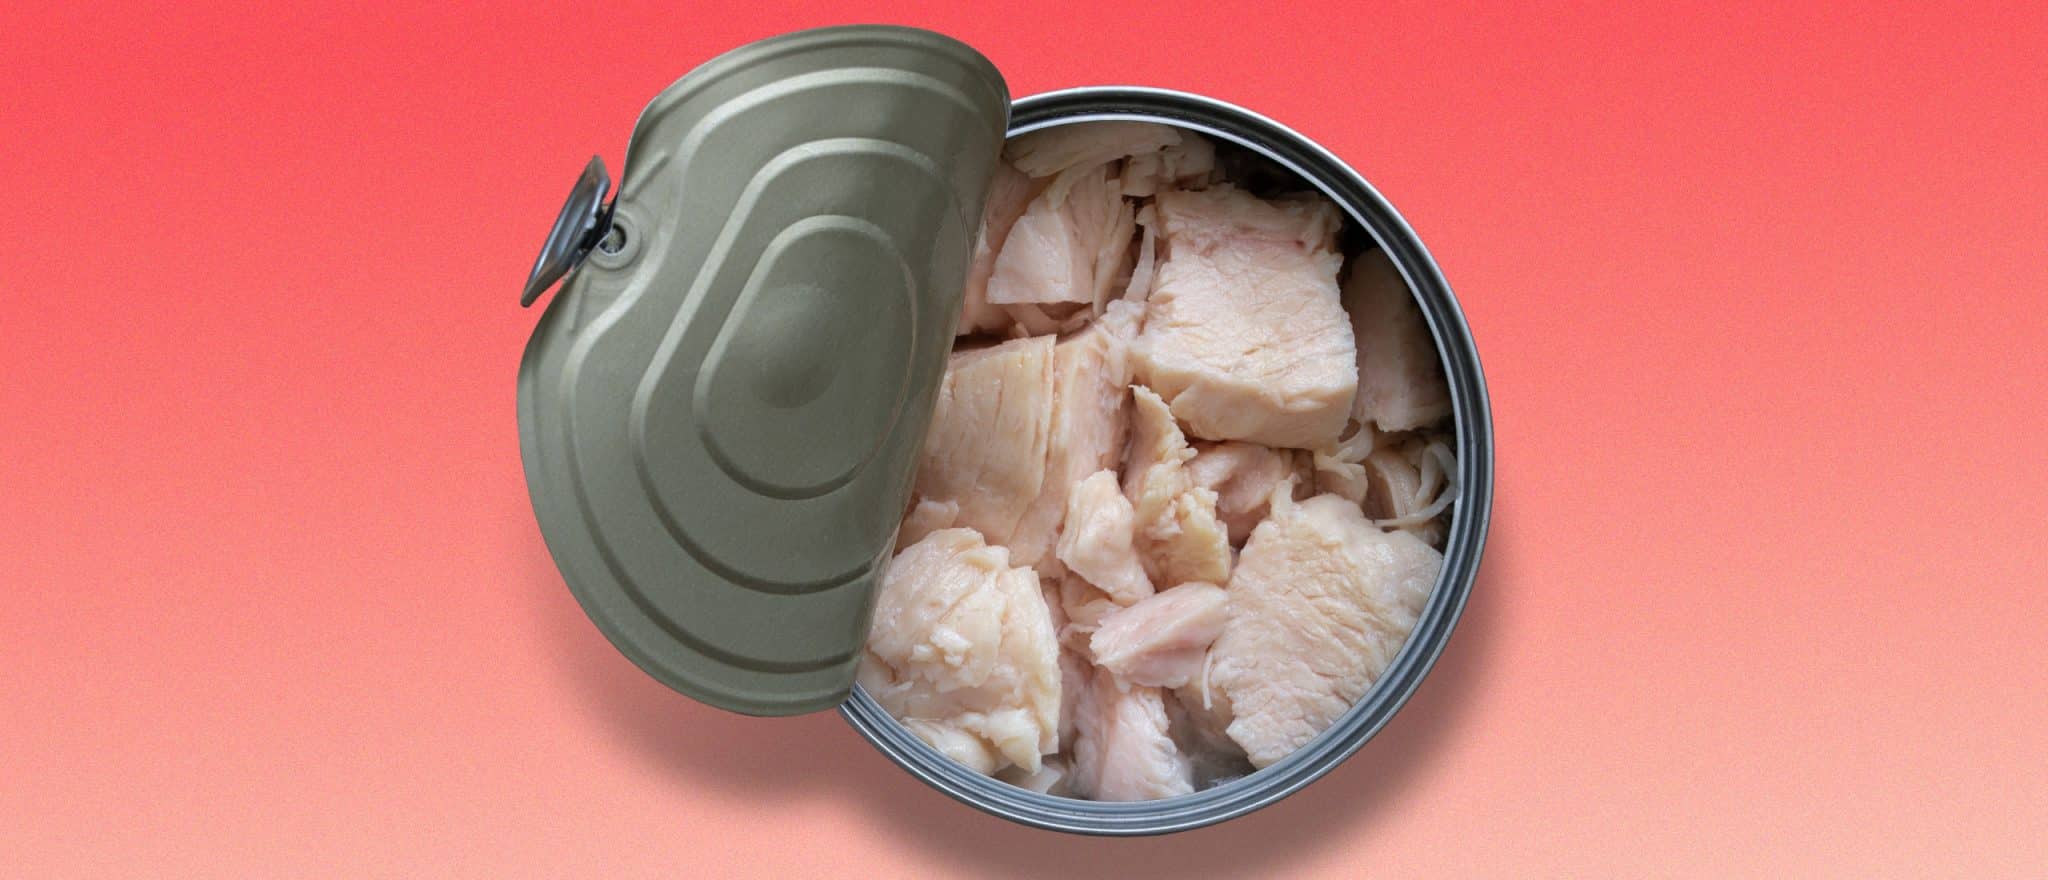 Canned Chicken Is Packed With Protein, but It’s Also Processed. Is It Healthy?